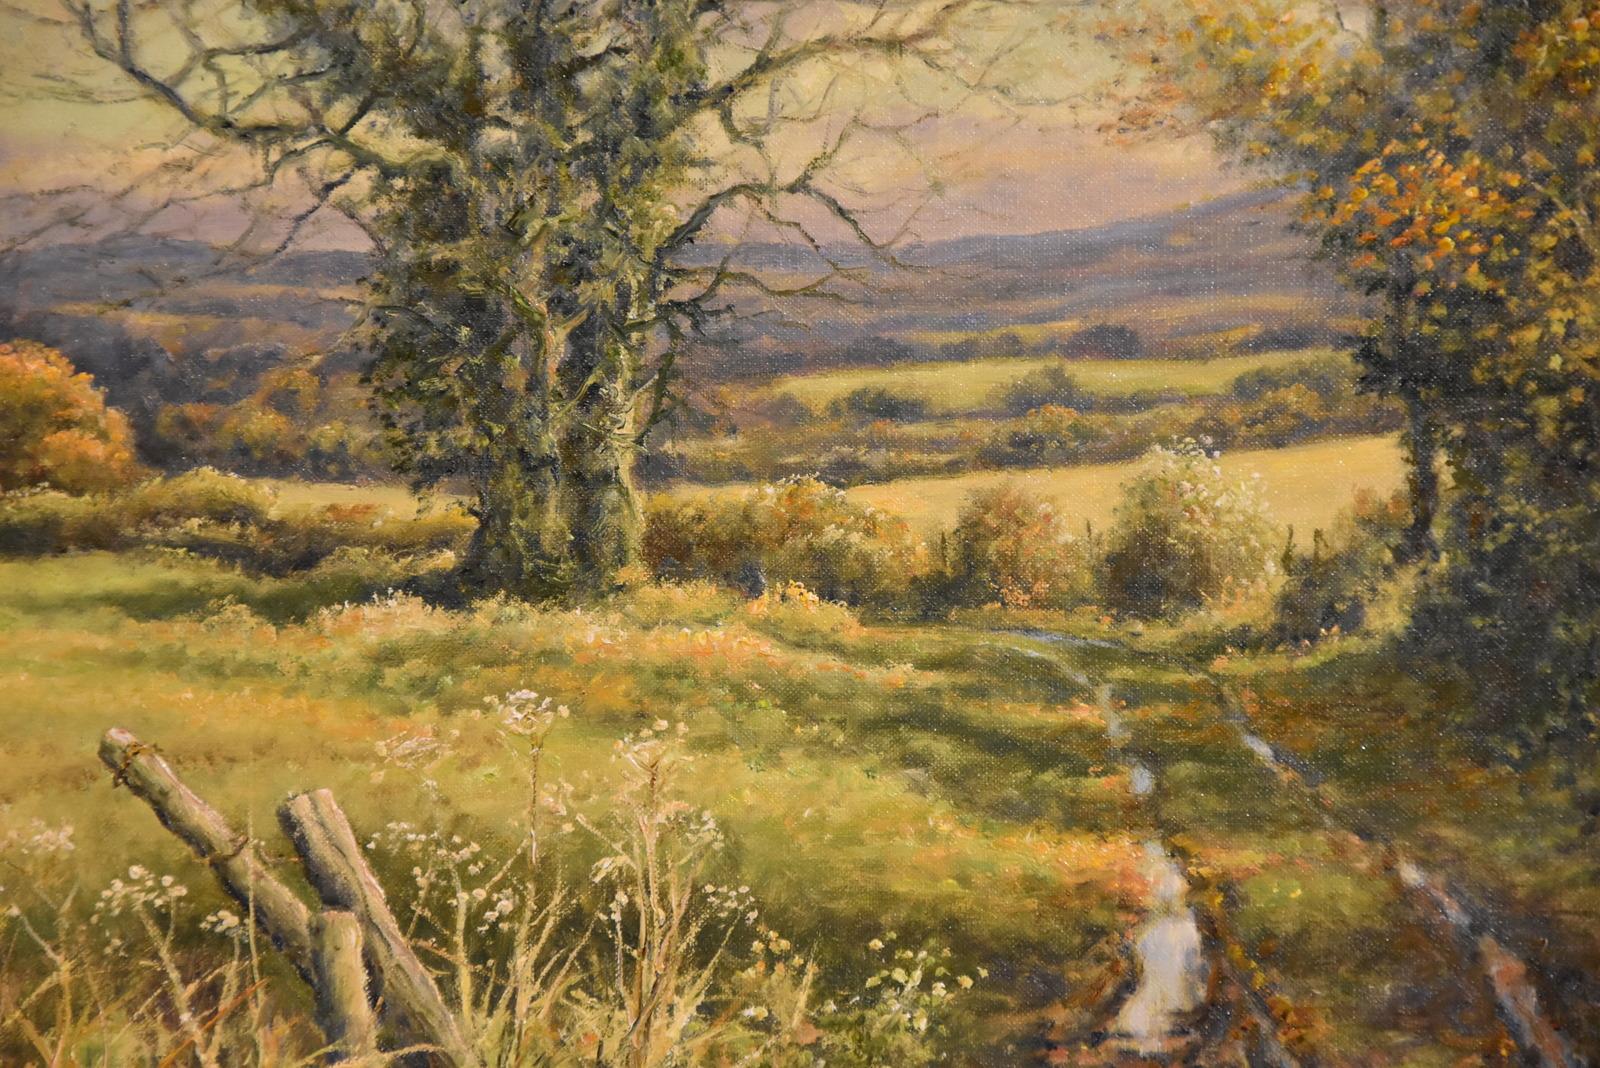 Oil painting by Mervyn Goode “Autumn Track towards the Downs”. Mervyn Goode born 1948 he studied at the Gloucestershire college of Art and never looked back after his first one man sell-out exhibition in London in 1970. Oil on canvas

Dimensions